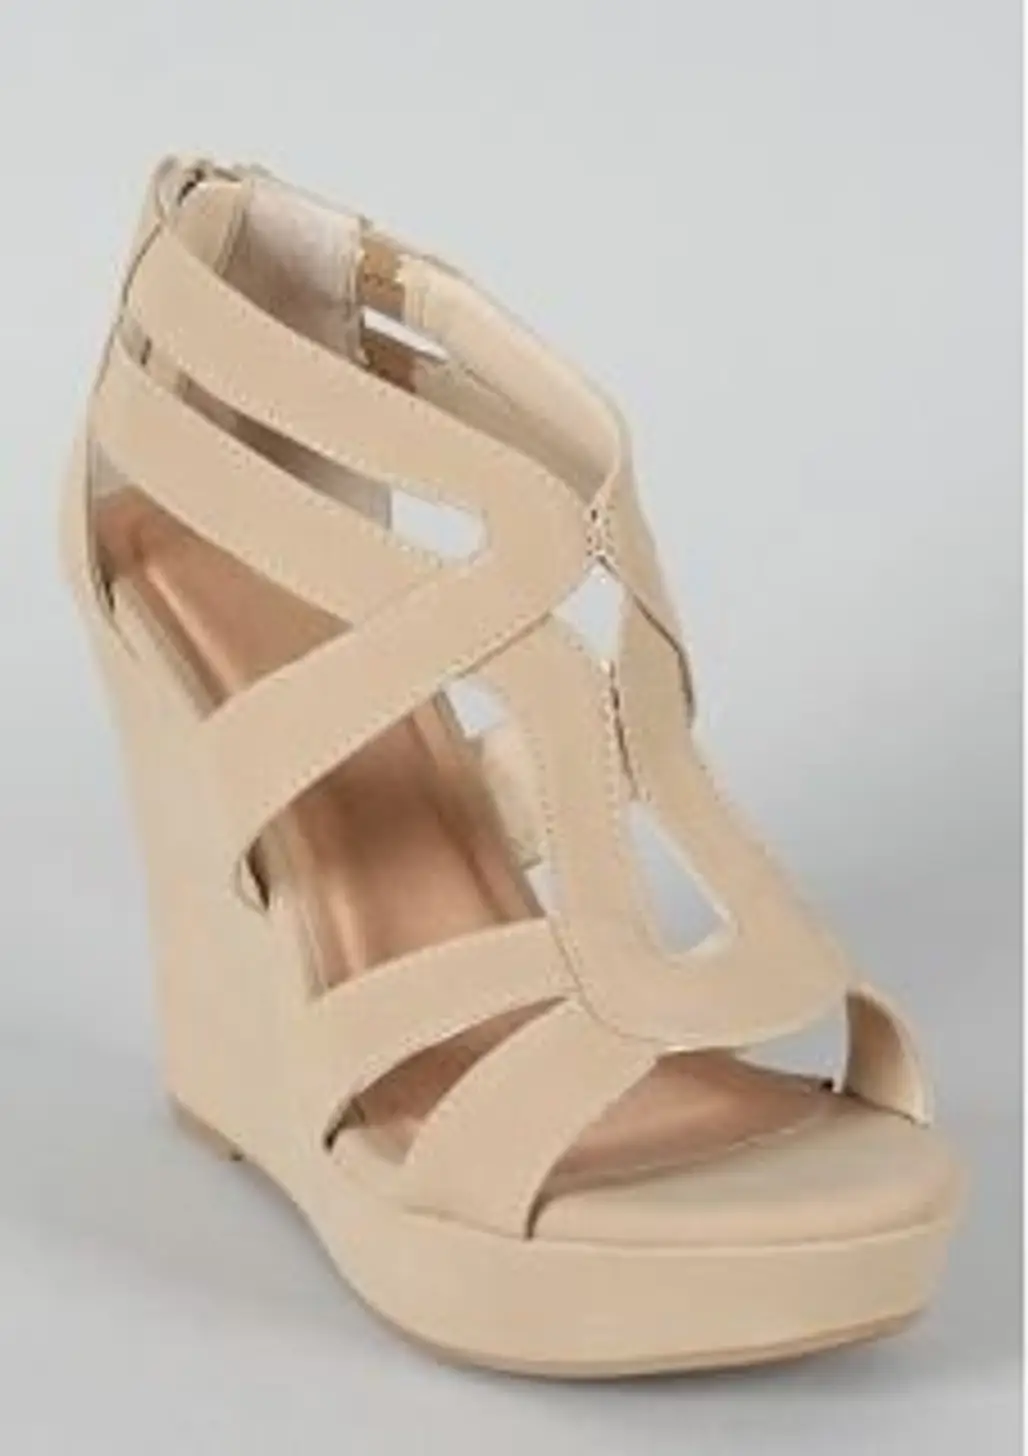 Nude Wedges